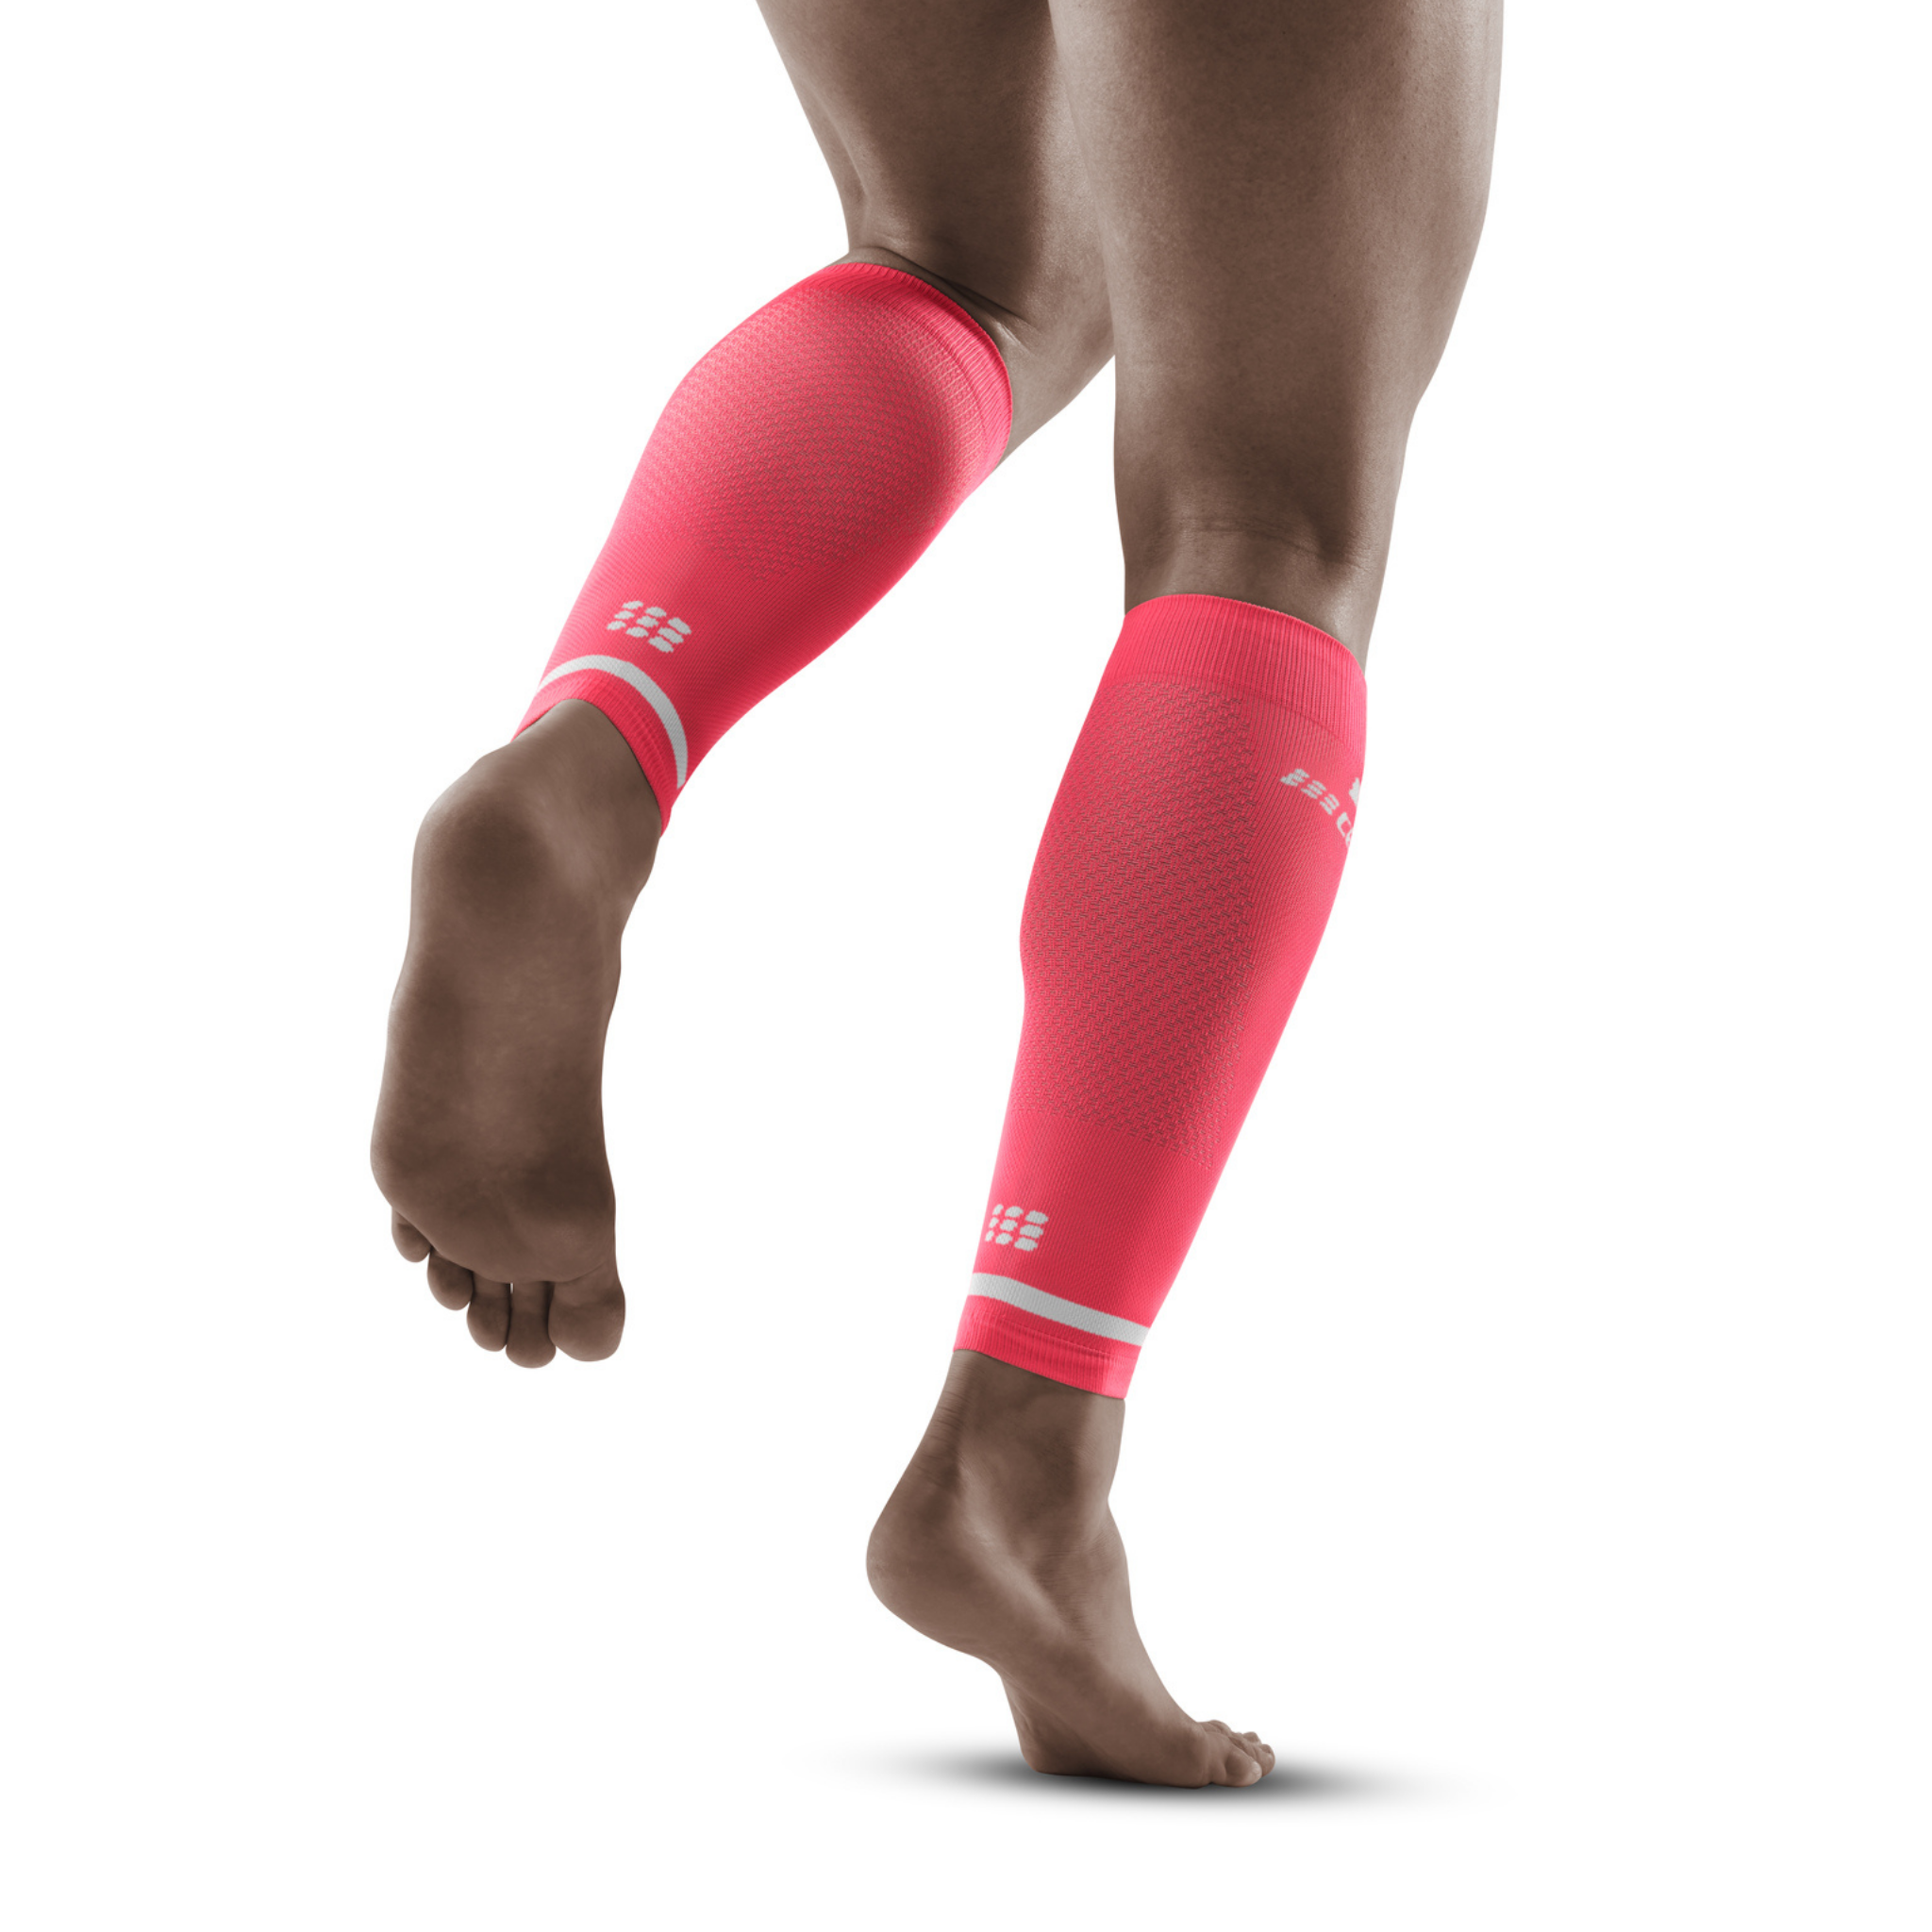 The Run Compression Calf Sleeves 4.0 for Compression Care